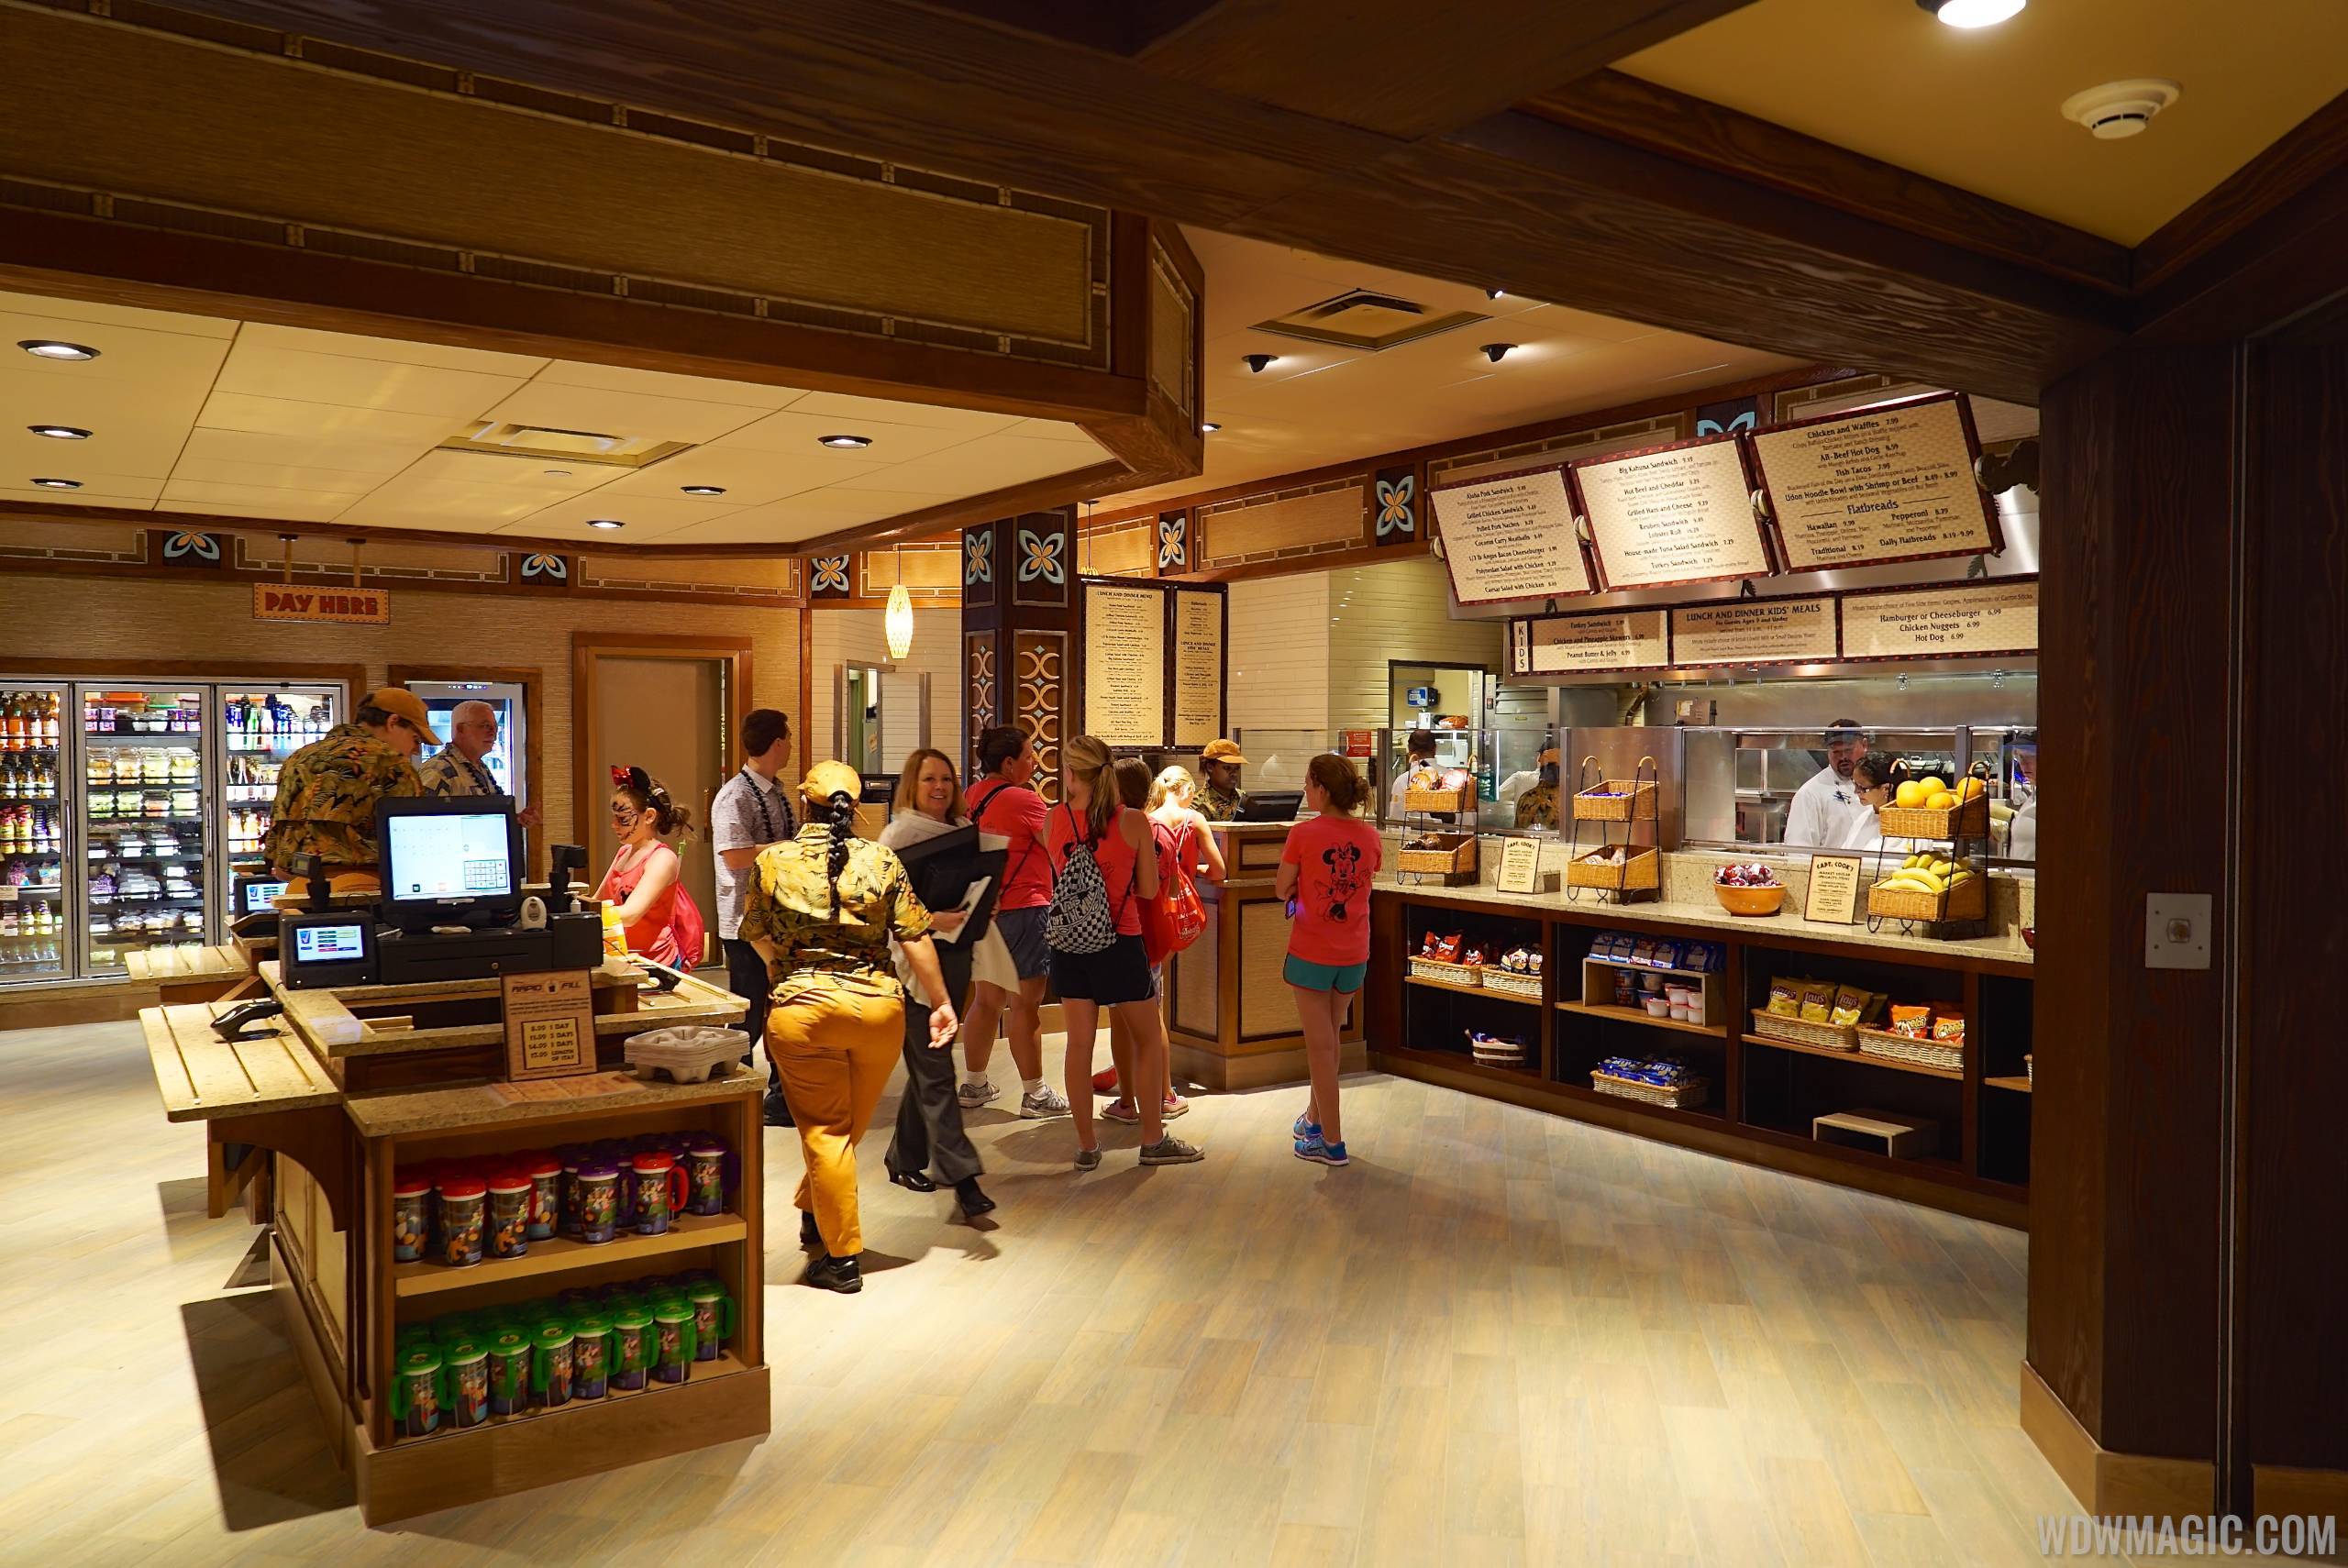 The ordering area at Captain Cook's